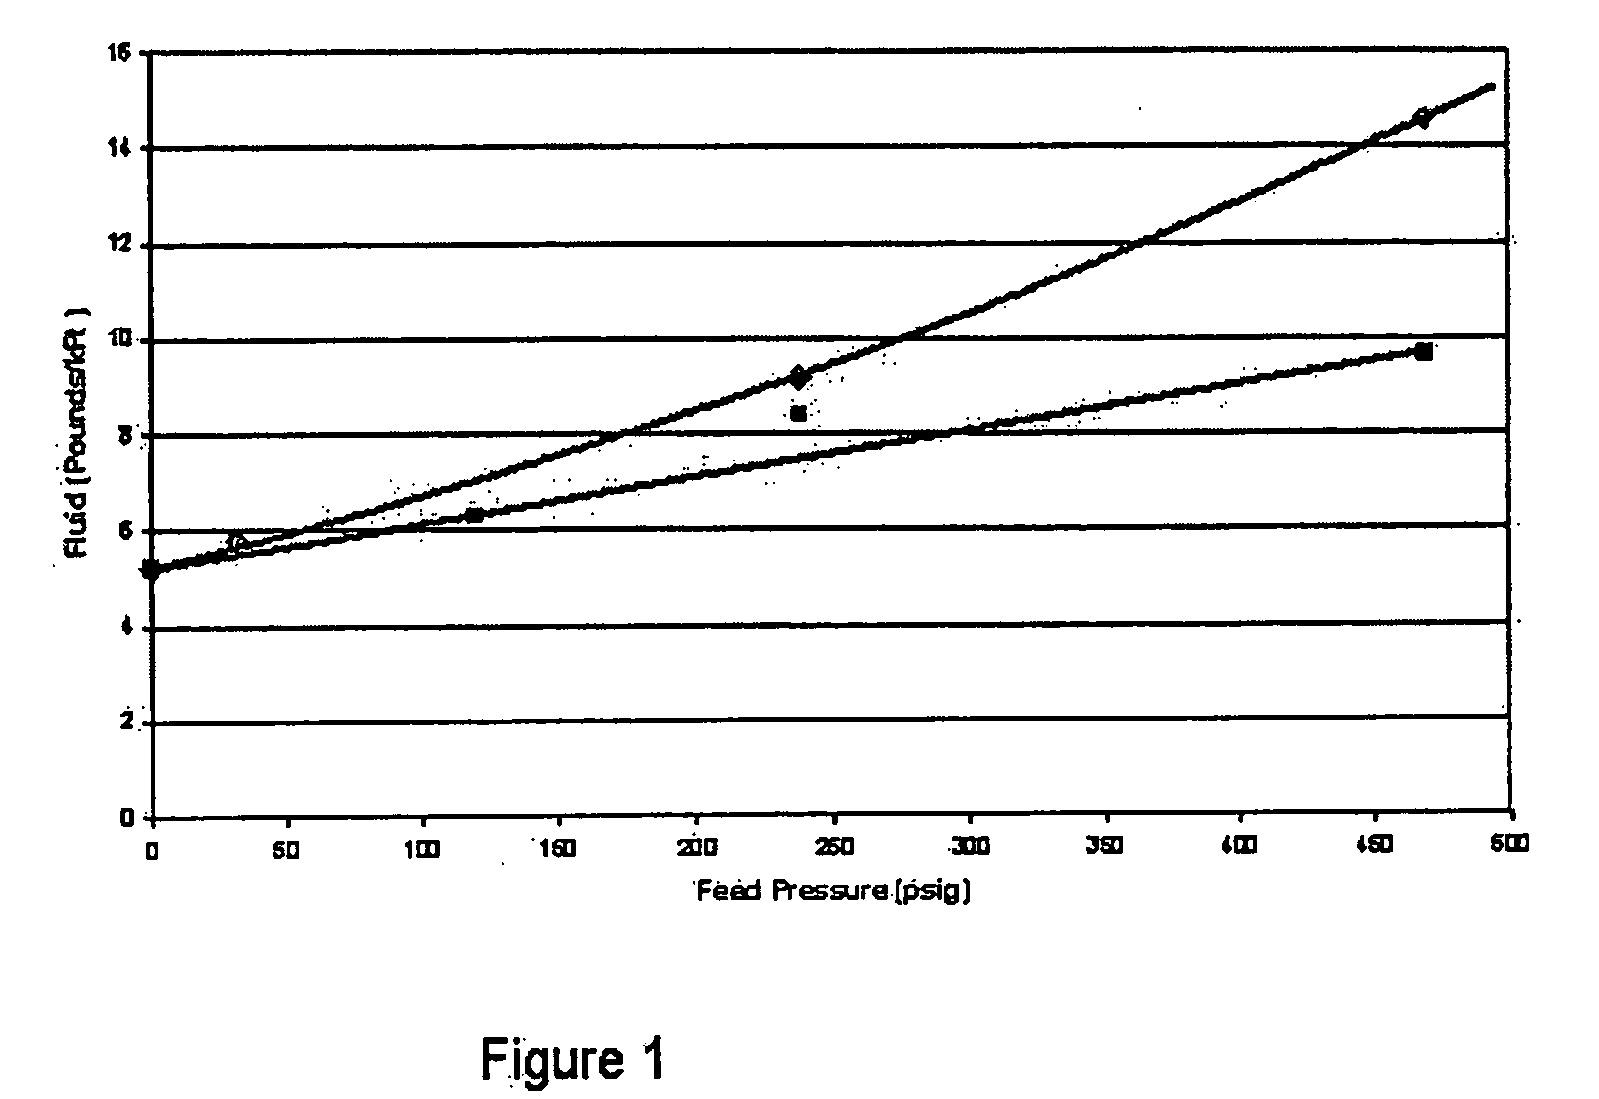 Method for selecting formulations to treat electrical cables